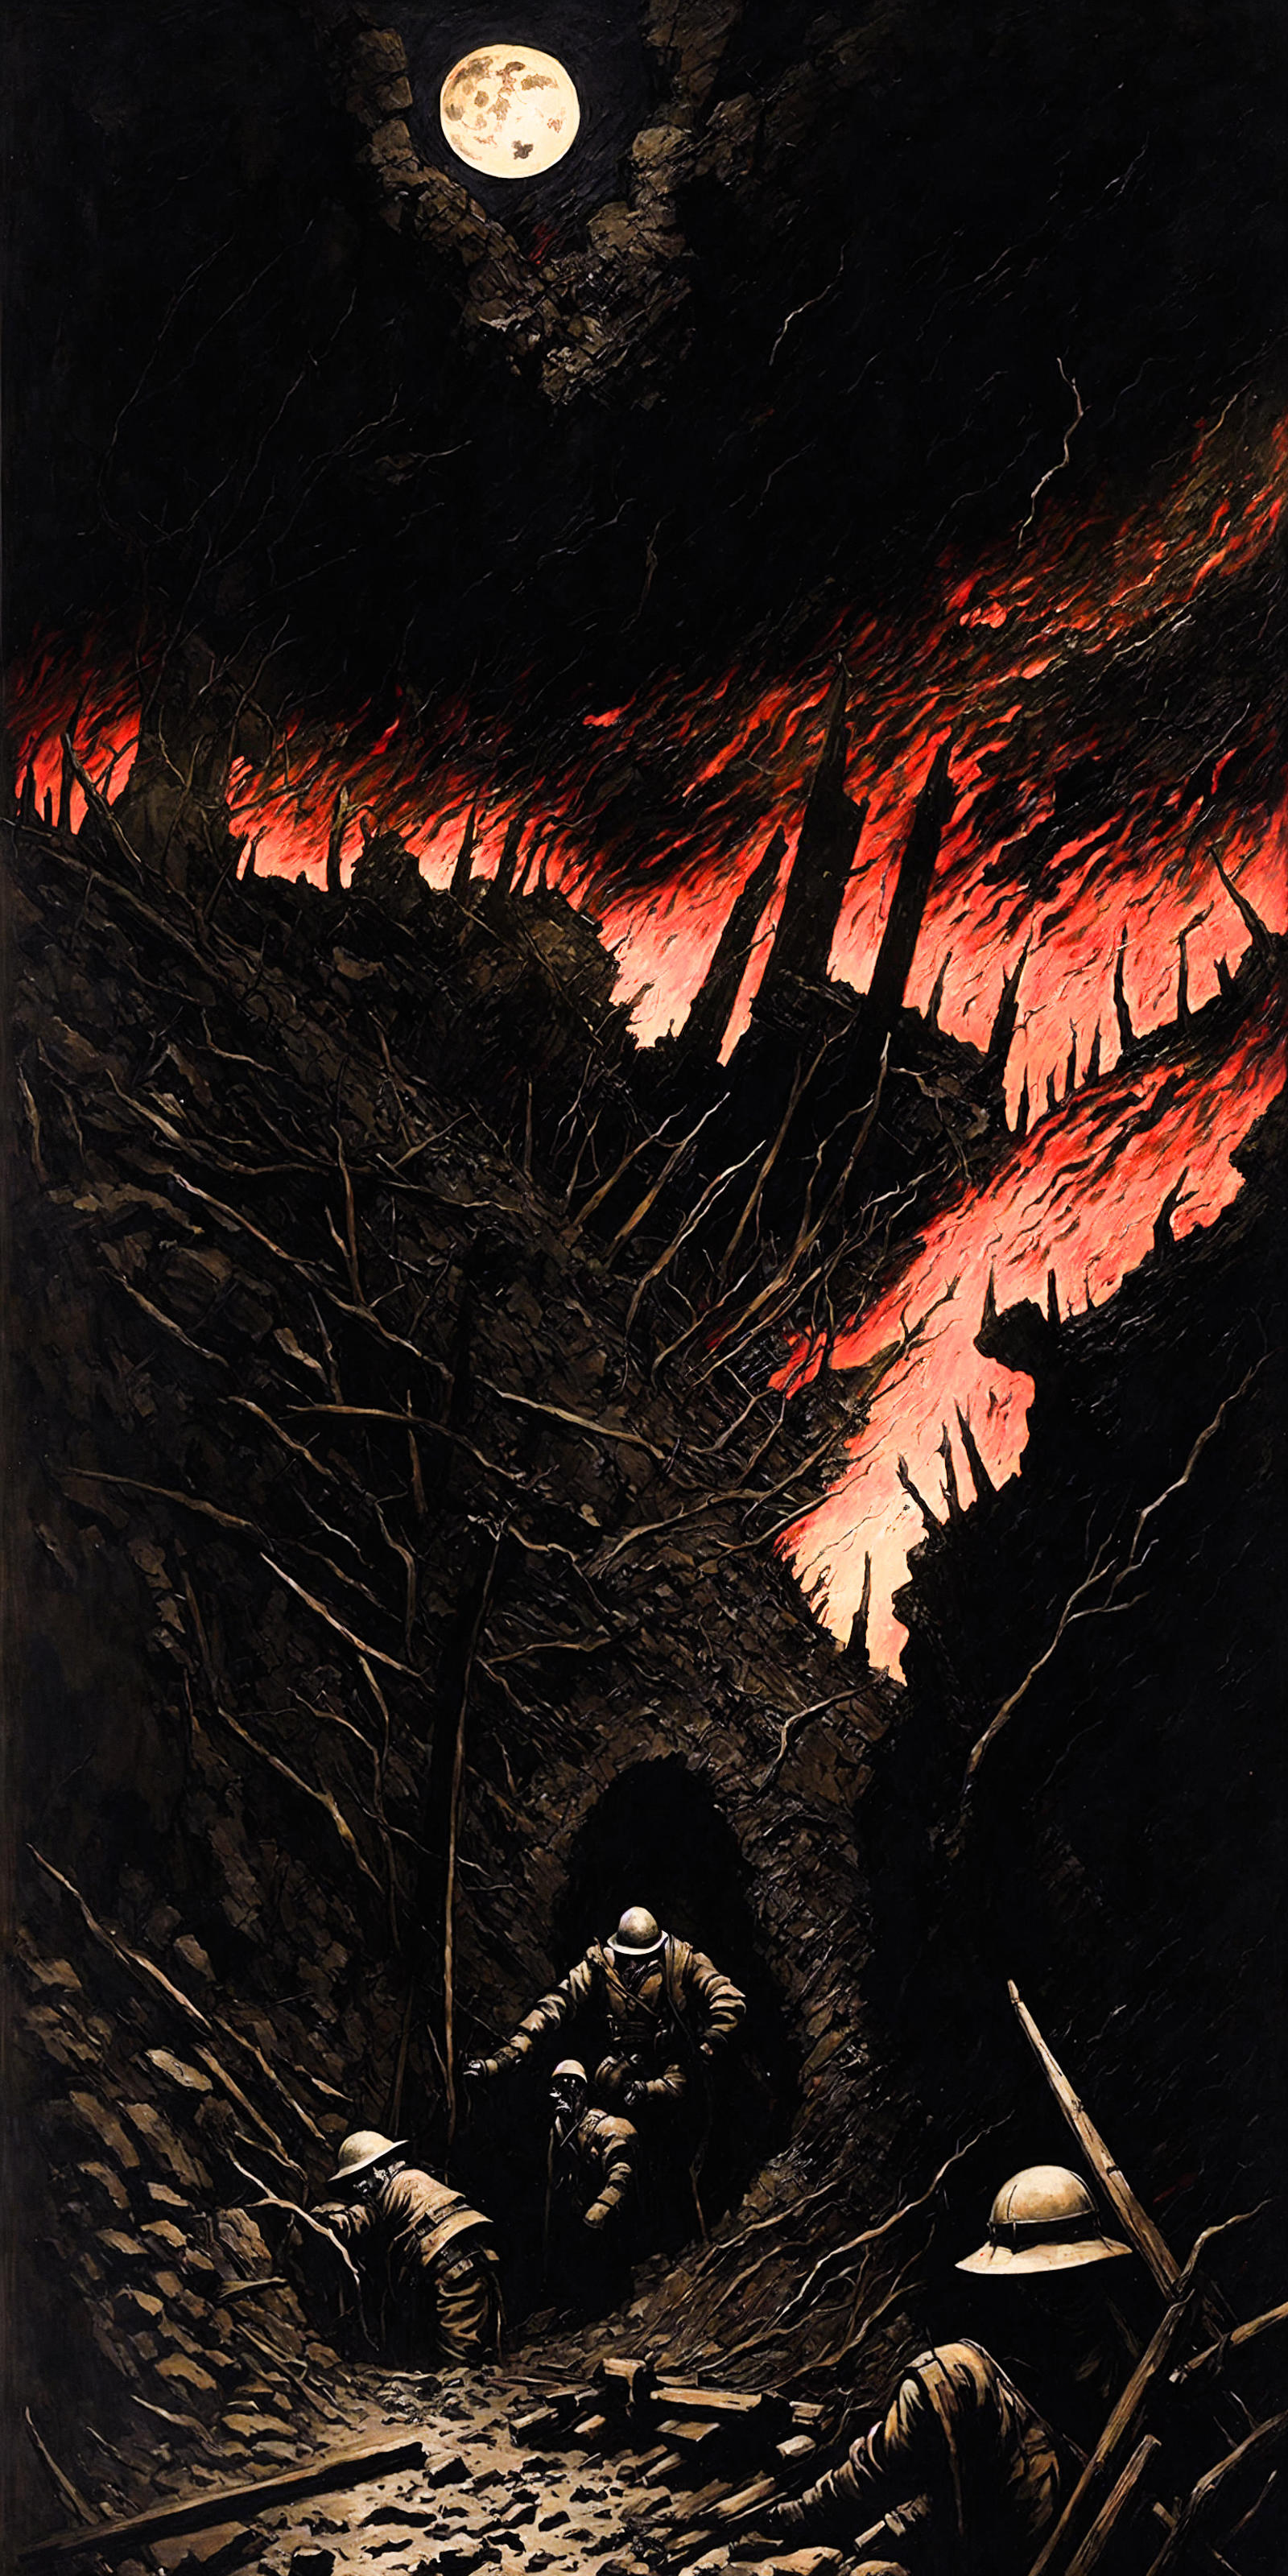 A painting of a dark cave with fire and a person inside.